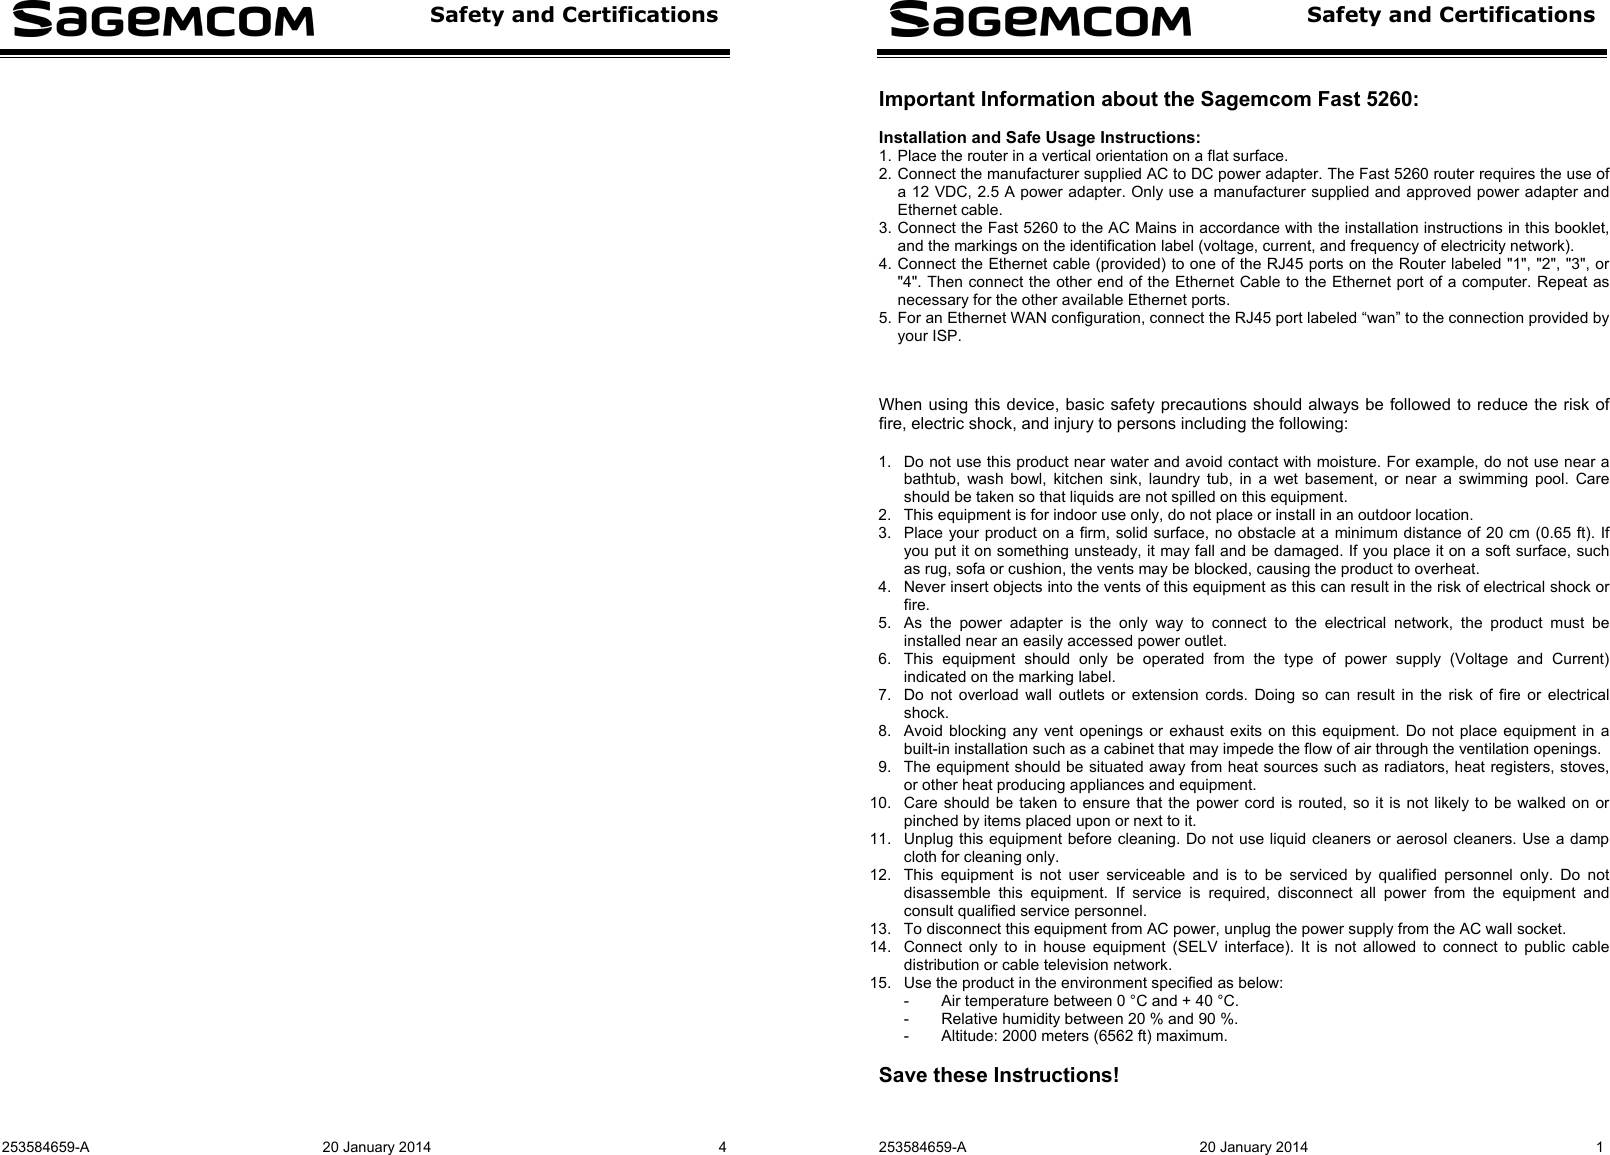  Safety and Certifications  253584659-A  20 January 2014  4    Safety and Certifications   253584659-A  20 January 2014  1 Important Information about the Sagemcom Fast 5260:  Installation and Safe Usage Instructions: 1. Place the router in a vertical orientation on a flat surface. 2. Connect the manufacturer supplied AC to DC power adapter. The Fast 5260 router requires the use of a 12 VDC, 2.5 A power adapter. Only use a manufacturer supplied and approved power adapter and Ethernet cable. 3. Connect the Fast 5260 to the AC Mains in accordance with the installation instructions in this booklet, and the markings on the identification label (voltage, current, and frequency of electricity network). 4. Connect the Ethernet cable (provided) to one of the RJ45 ports on the Router labeled &quot;1&quot;, &quot;2&quot;, &quot;3&quot;, or &quot;4&quot;. Then connect the other end of the Ethernet Cable to the Ethernet port of a computer. Repeat as necessary for the other available Ethernet ports. 5. For an Ethernet WAN configuration, connect the RJ45 port labeled “wan” to the connection provided by your ISP.    When using this device, basic safety precautions should always be followed to reduce the risk of fire, electric shock, and injury to persons including the following:  1.  Do not use this product near water and avoid contact with moisture. For example, do not use near a bathtub, wash bowl, kitchen sink, laundry tub, in a wet basement, or near a swimming pool. Care should be taken so that liquids are not spilled on this equipment. 2.  This equipment is for indoor use only, do not place or install in an outdoor location. 3.  Place your product on a firm, solid surface, no obstacle at a minimum distance of 20 cm (0.65 ft). If you put it on something unsteady, it may fall and be damaged. If you place it on a soft surface, such as rug, sofa or cushion, the vents may be blocked, causing the product to overheat. 4.  Never insert objects into the vents of this equipment as this can result in the risk of electrical shock or fire. 5.  As the power adapter is the only way to connect to the electrical network, the product must be installed near an easily accessed power outlet. 6.  This equipment should only be operated from the type of power supply (Voltage and Current) indicated on the marking label. 7.  Do not overload wall outlets or extension cords. Doing so can result in the risk of fire or electrical shock. 8.  Avoid blocking any vent openings or exhaust exits on this equipment. Do not place equipment in a built-in installation such as a cabinet that may impede the flow of air through the ventilation openings. 9.  The equipment should be situated away from heat sources such as radiators, heat registers, stoves, or other heat producing appliances and equipment. 10.  Care should be taken to ensure that the power cord is routed, so it is not likely to be walked on or pinched by items placed upon or next to it. 11.  Unplug this equipment before cleaning. Do not use liquid cleaners or aerosol cleaners. Use a damp cloth for cleaning only. 12.  This equipment is not user serviceable and is to be serviced by qualified personnel only. Do not disassemble this equipment. If service is required, disconnect all power from the equipment and consult qualified service personnel. 13.  To disconnect this equipment from AC power, unplug the power supply from the AC wall socket. 14.  Connect only to in house equipment (SELV interface). It is not allowed to connect to public cable distribution or cable television network. 15.  Use the product in the environment specified as below: -  Air temperature between 0 °C and + 40 °C. -  Relative humidity between 20 % and 90 %. -  Altitude: 2000 meters (6562 ft) maximum.  Save these Instructions!  